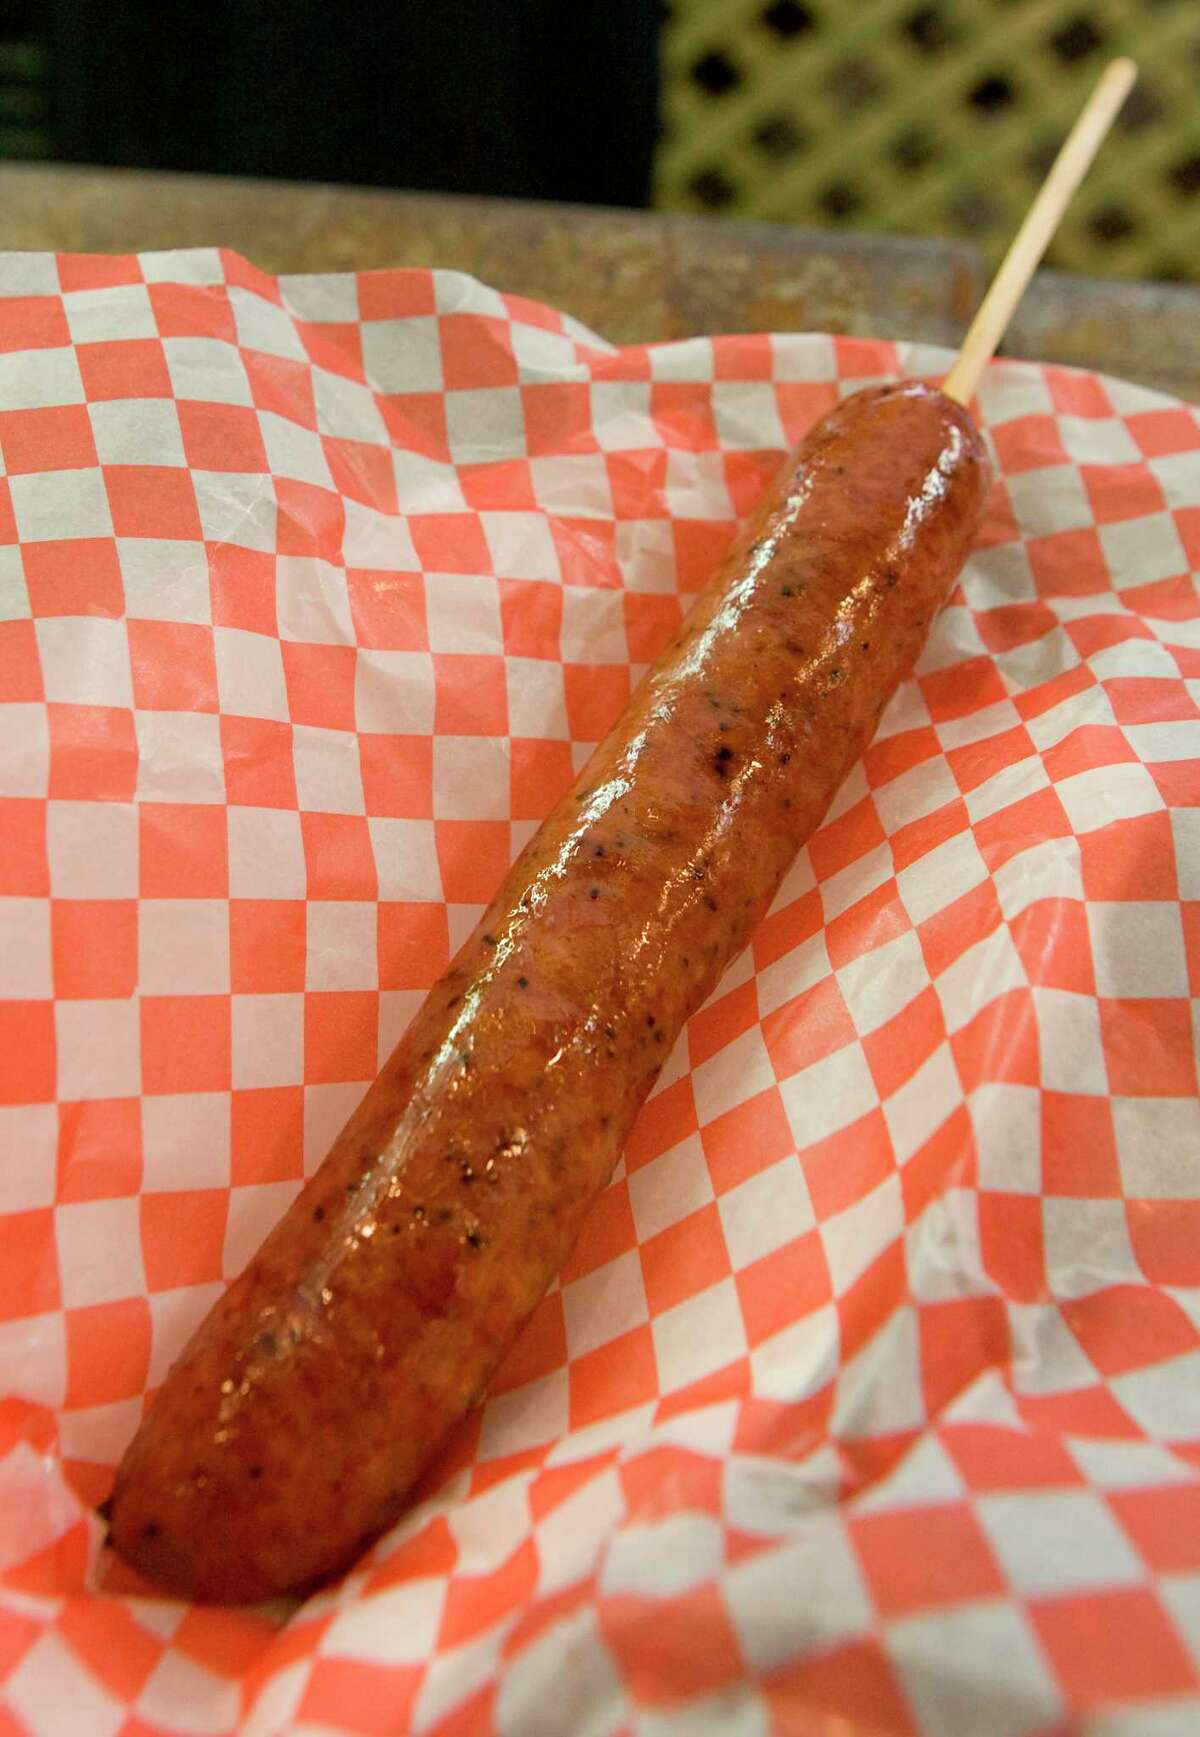 Sausage on a stick from Holmes Smokehouse booth is a popular food item at the Houston Livestock Show and Rodeo. (Friday, March 6, 2009, in Houston. ( Steve Campbell / Houston Chronicle)